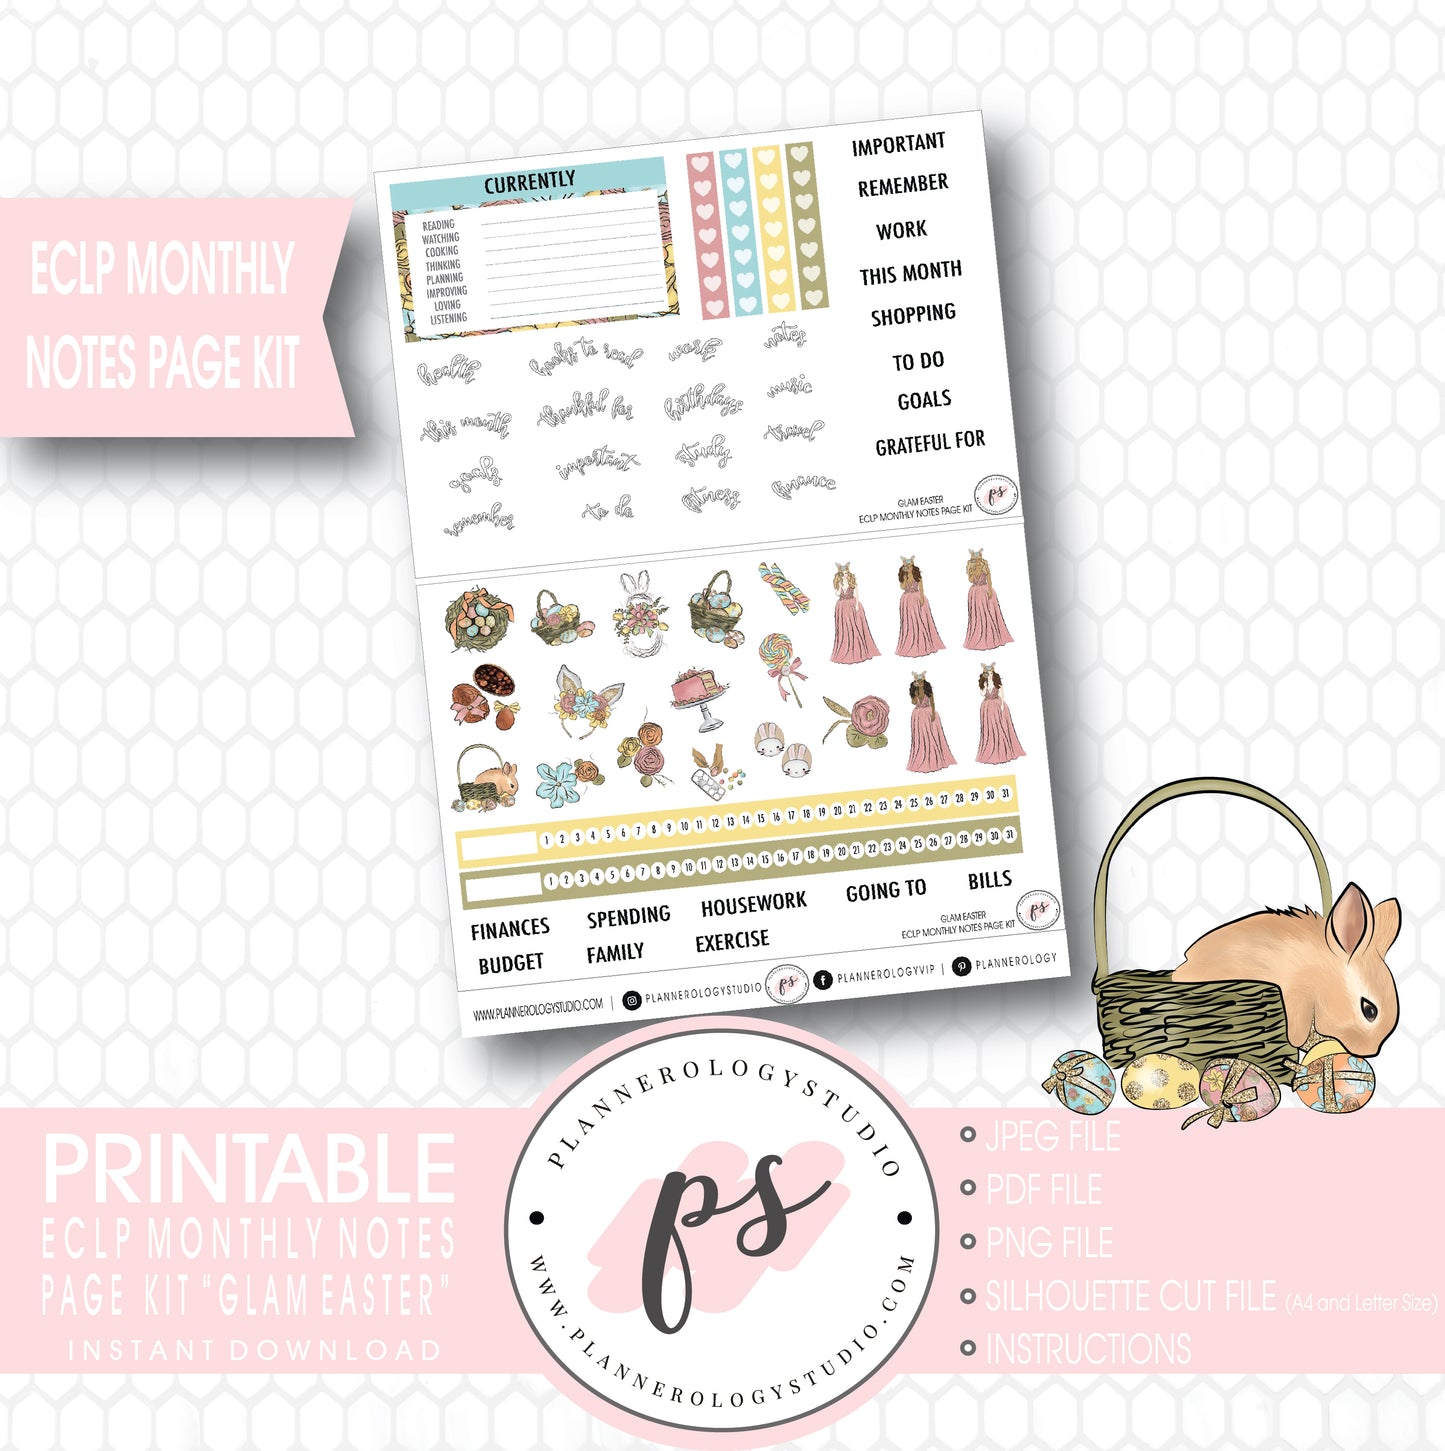 Glam Easter Monthly Notes Page Kit Digital Printable Planner Stickers (for use with ECLP) - Plannerologystudio